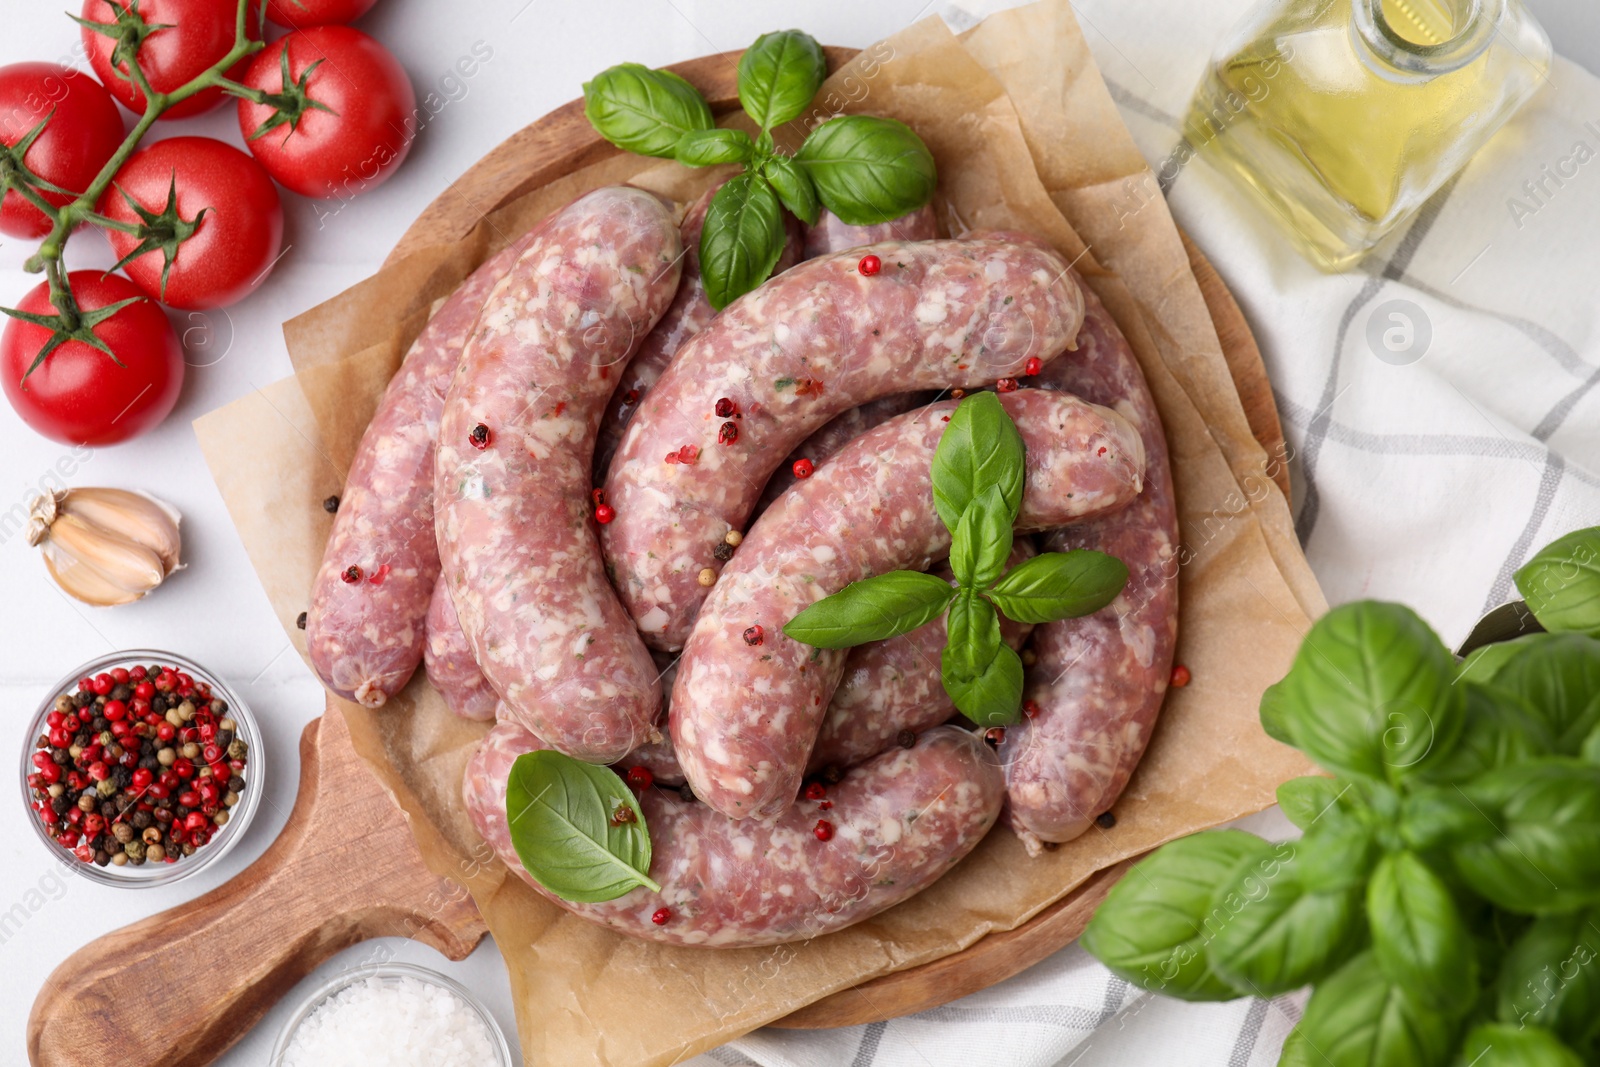 Photo of Raw homemade sausages, basil leaves, tomatoes and spices on white table, flat lay